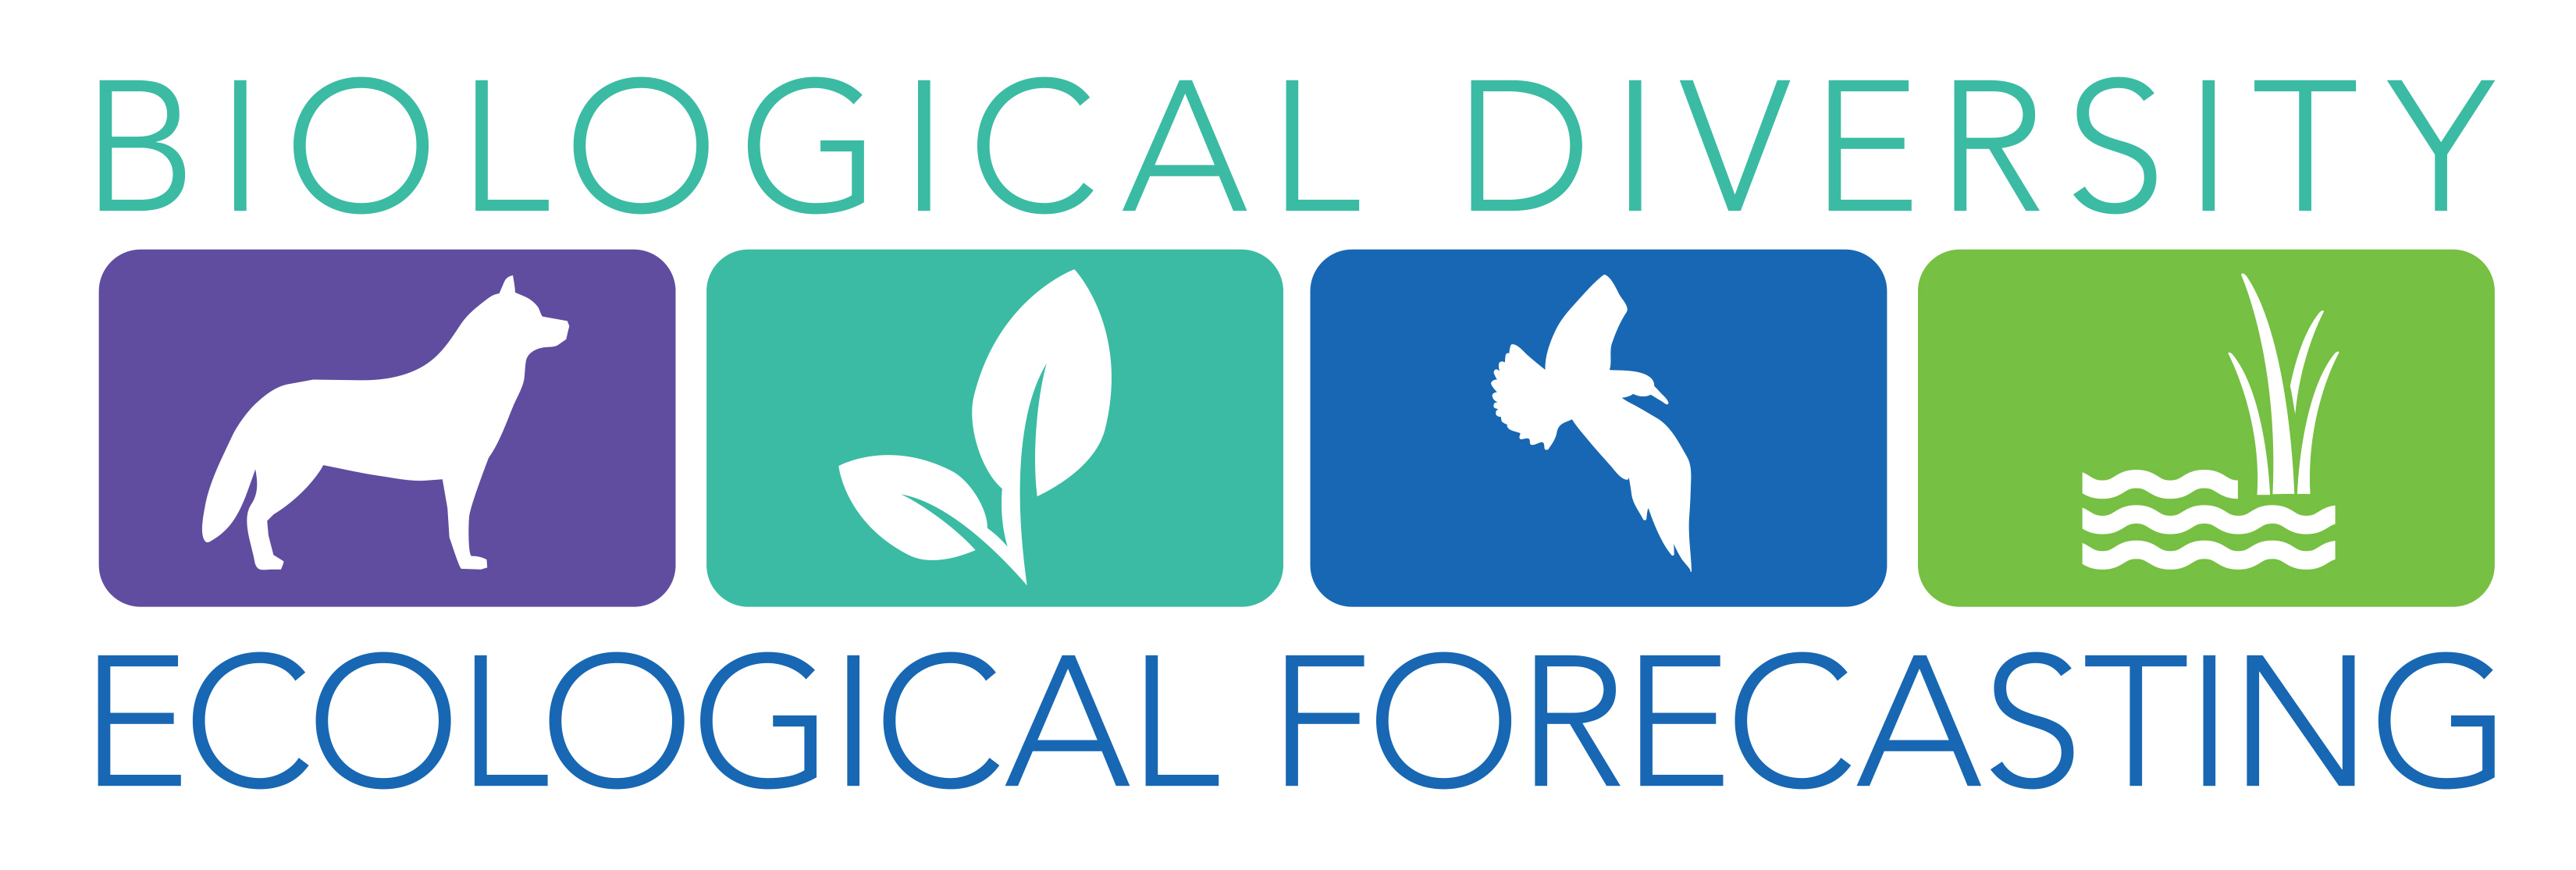 Biodiversity image with various colored icons.